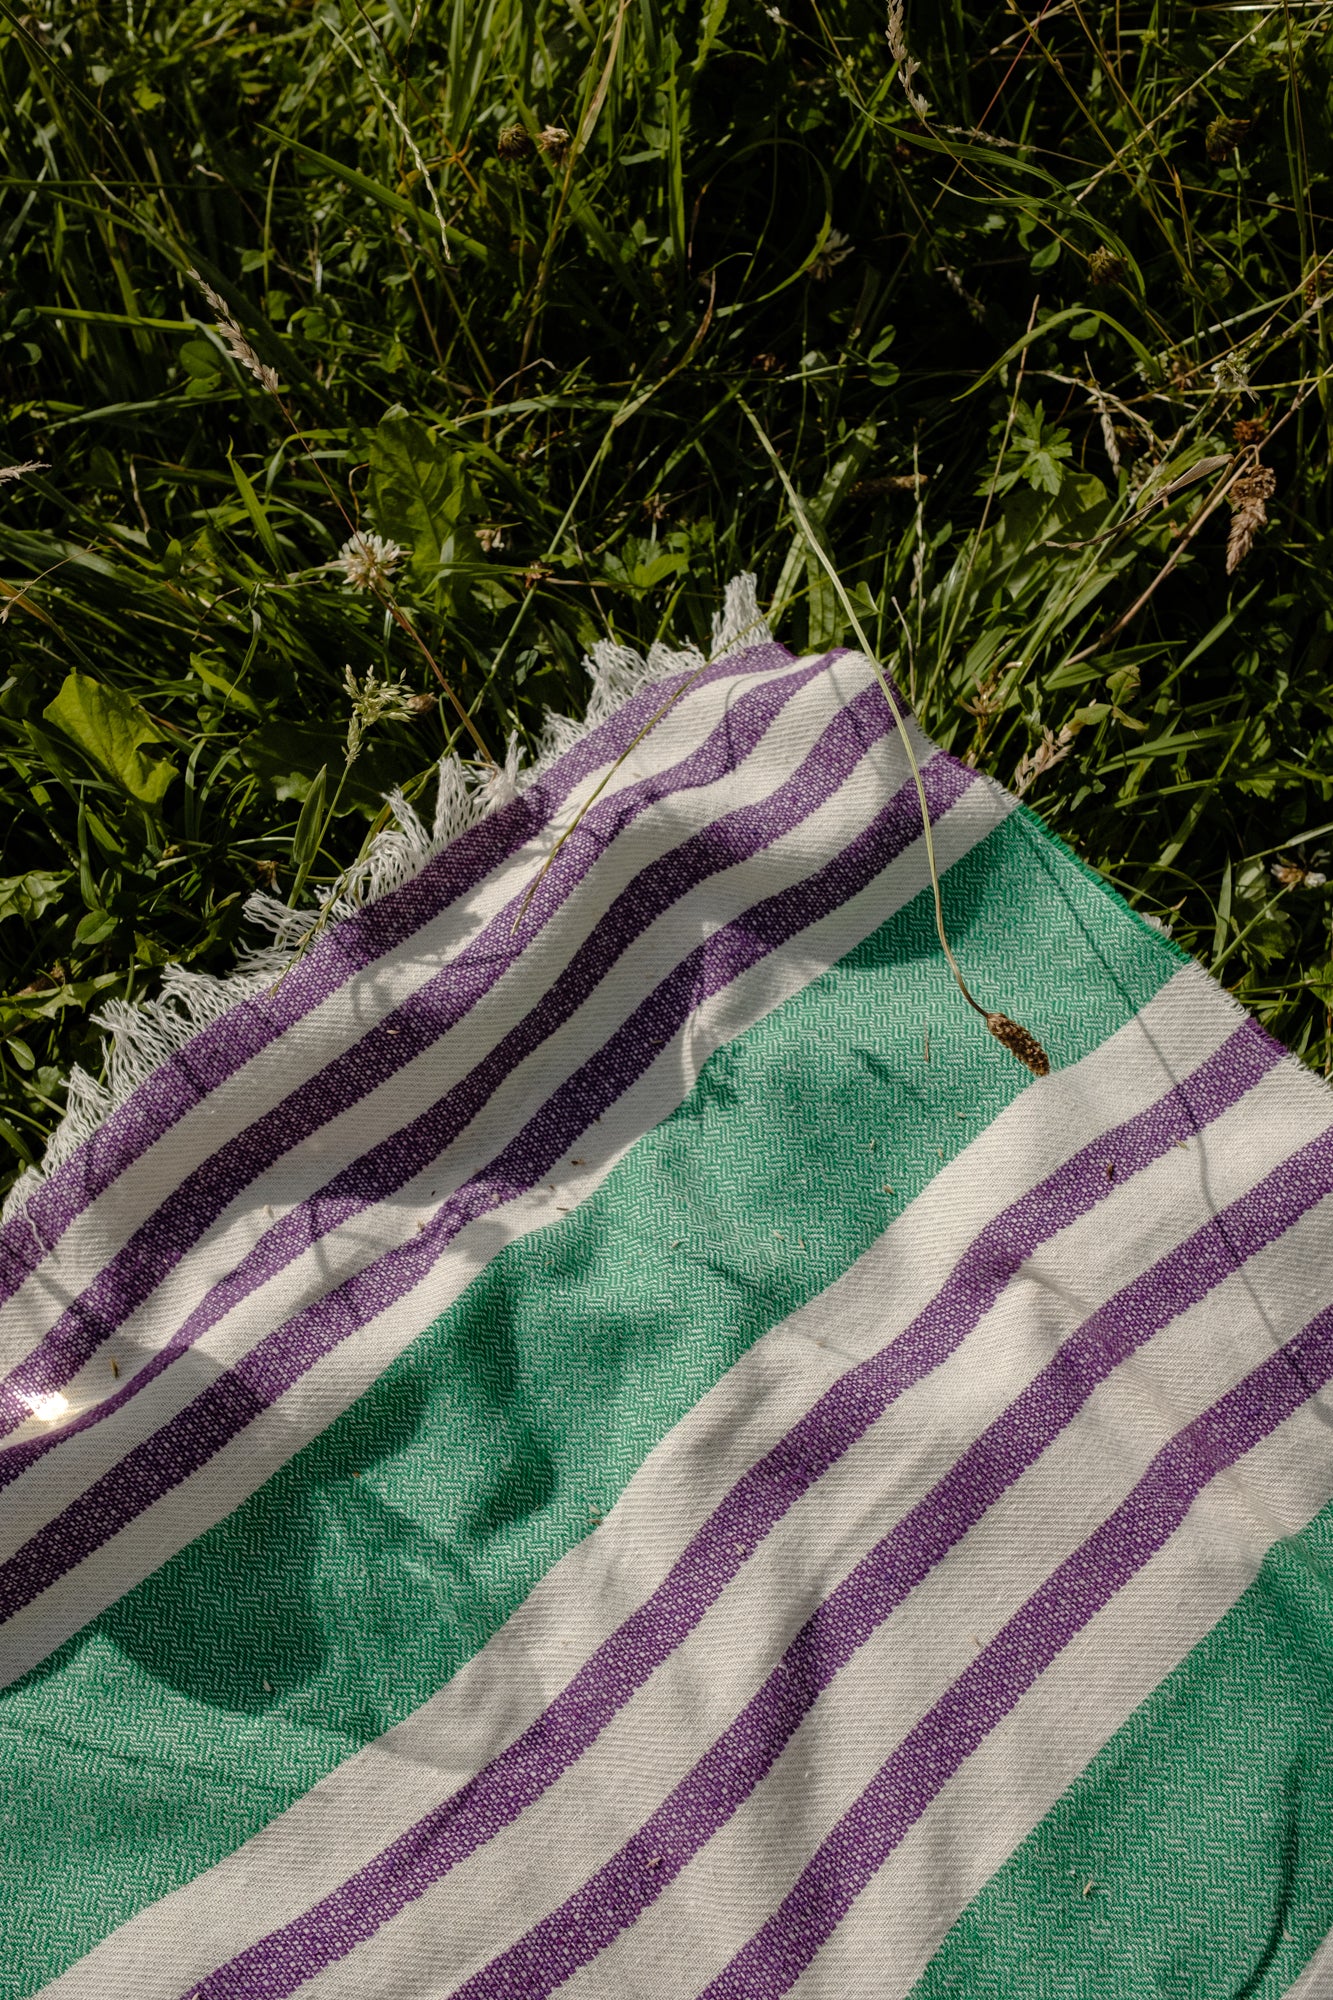 Recycled Cotton Blanket - Limited Striped Edition